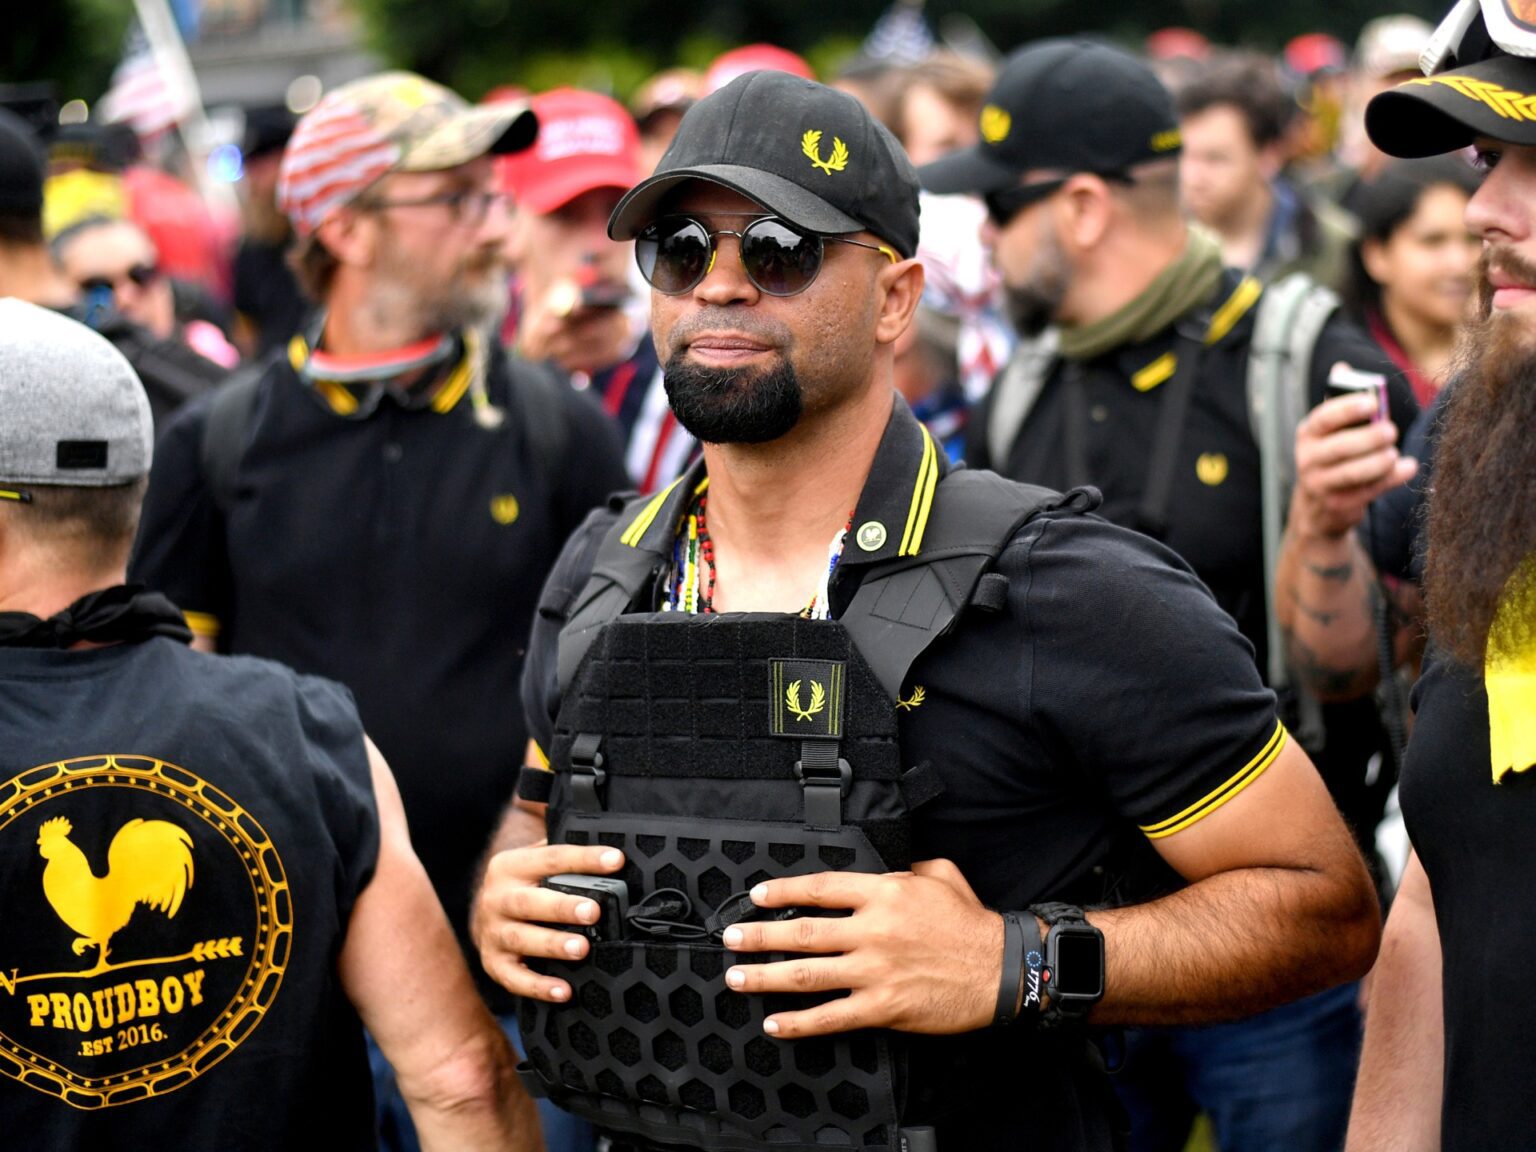 Scapegoats or ‘Trump’s Army’: Proud Boys’ Process